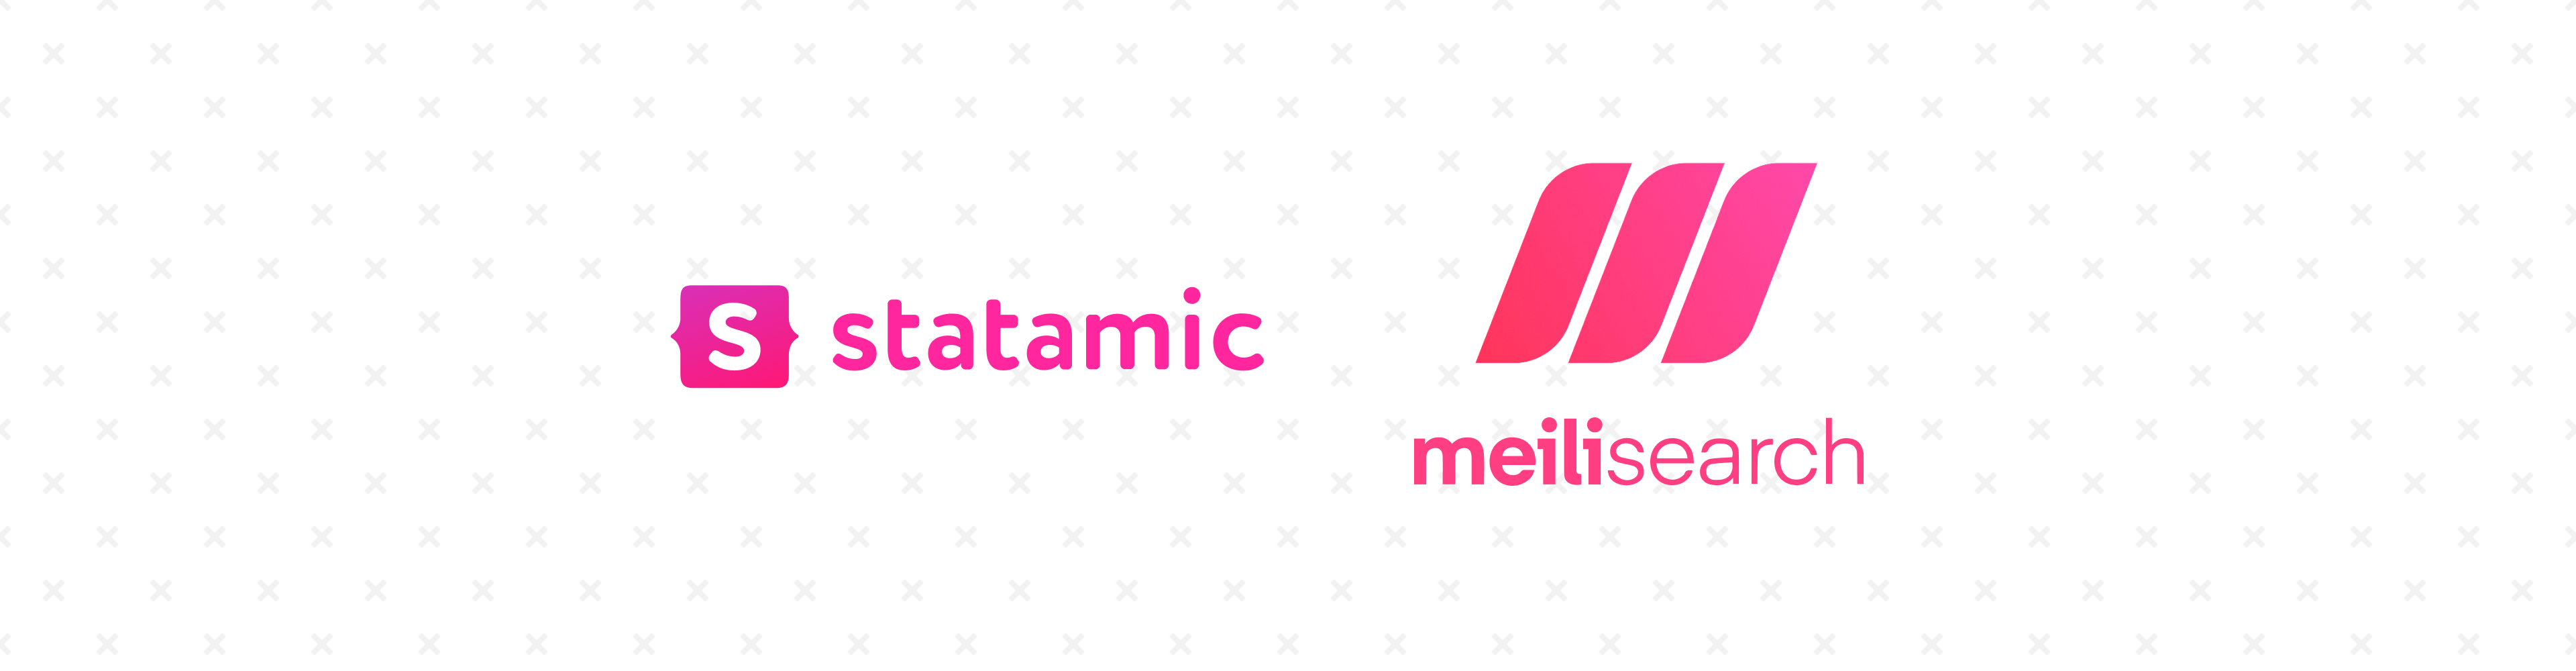 Statamic and Meilisearch logos